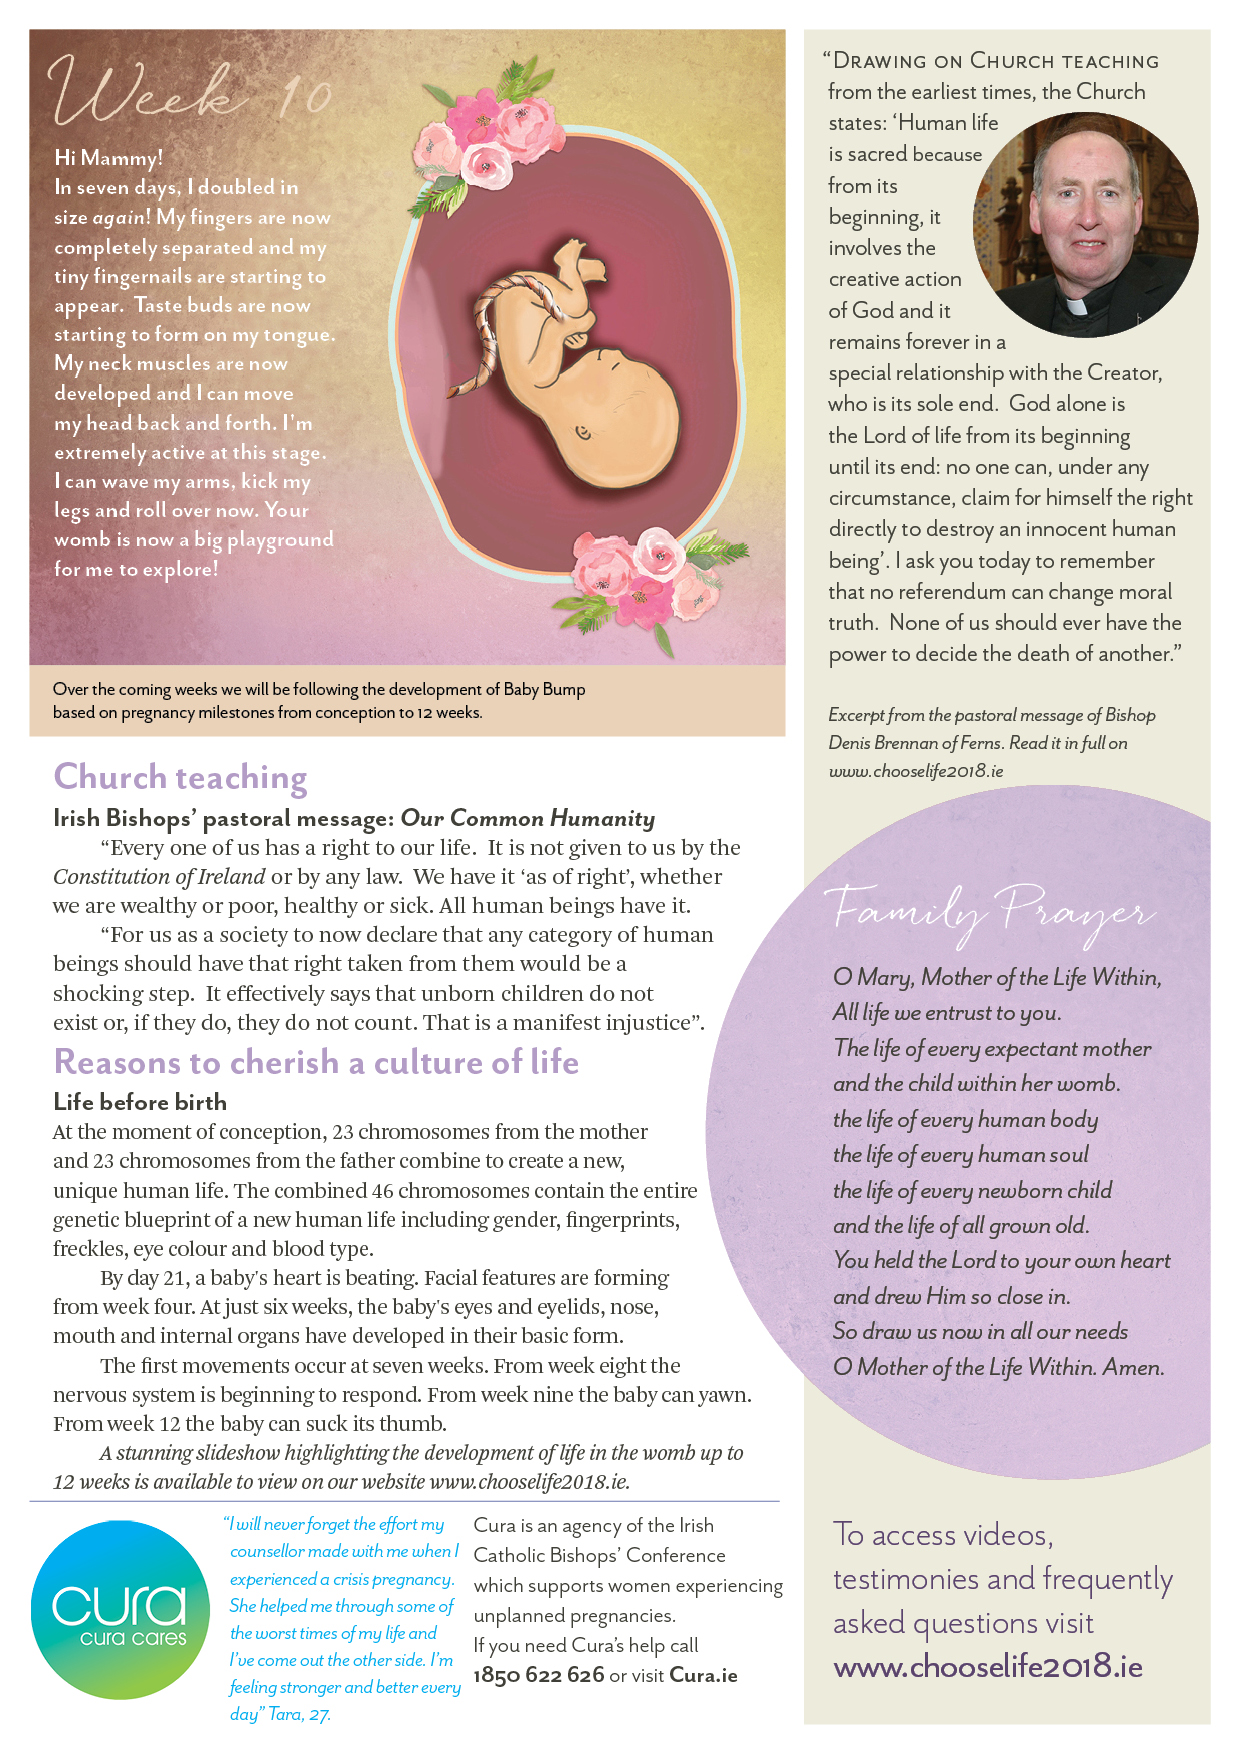 ChooseLife2018_Issue14_p2